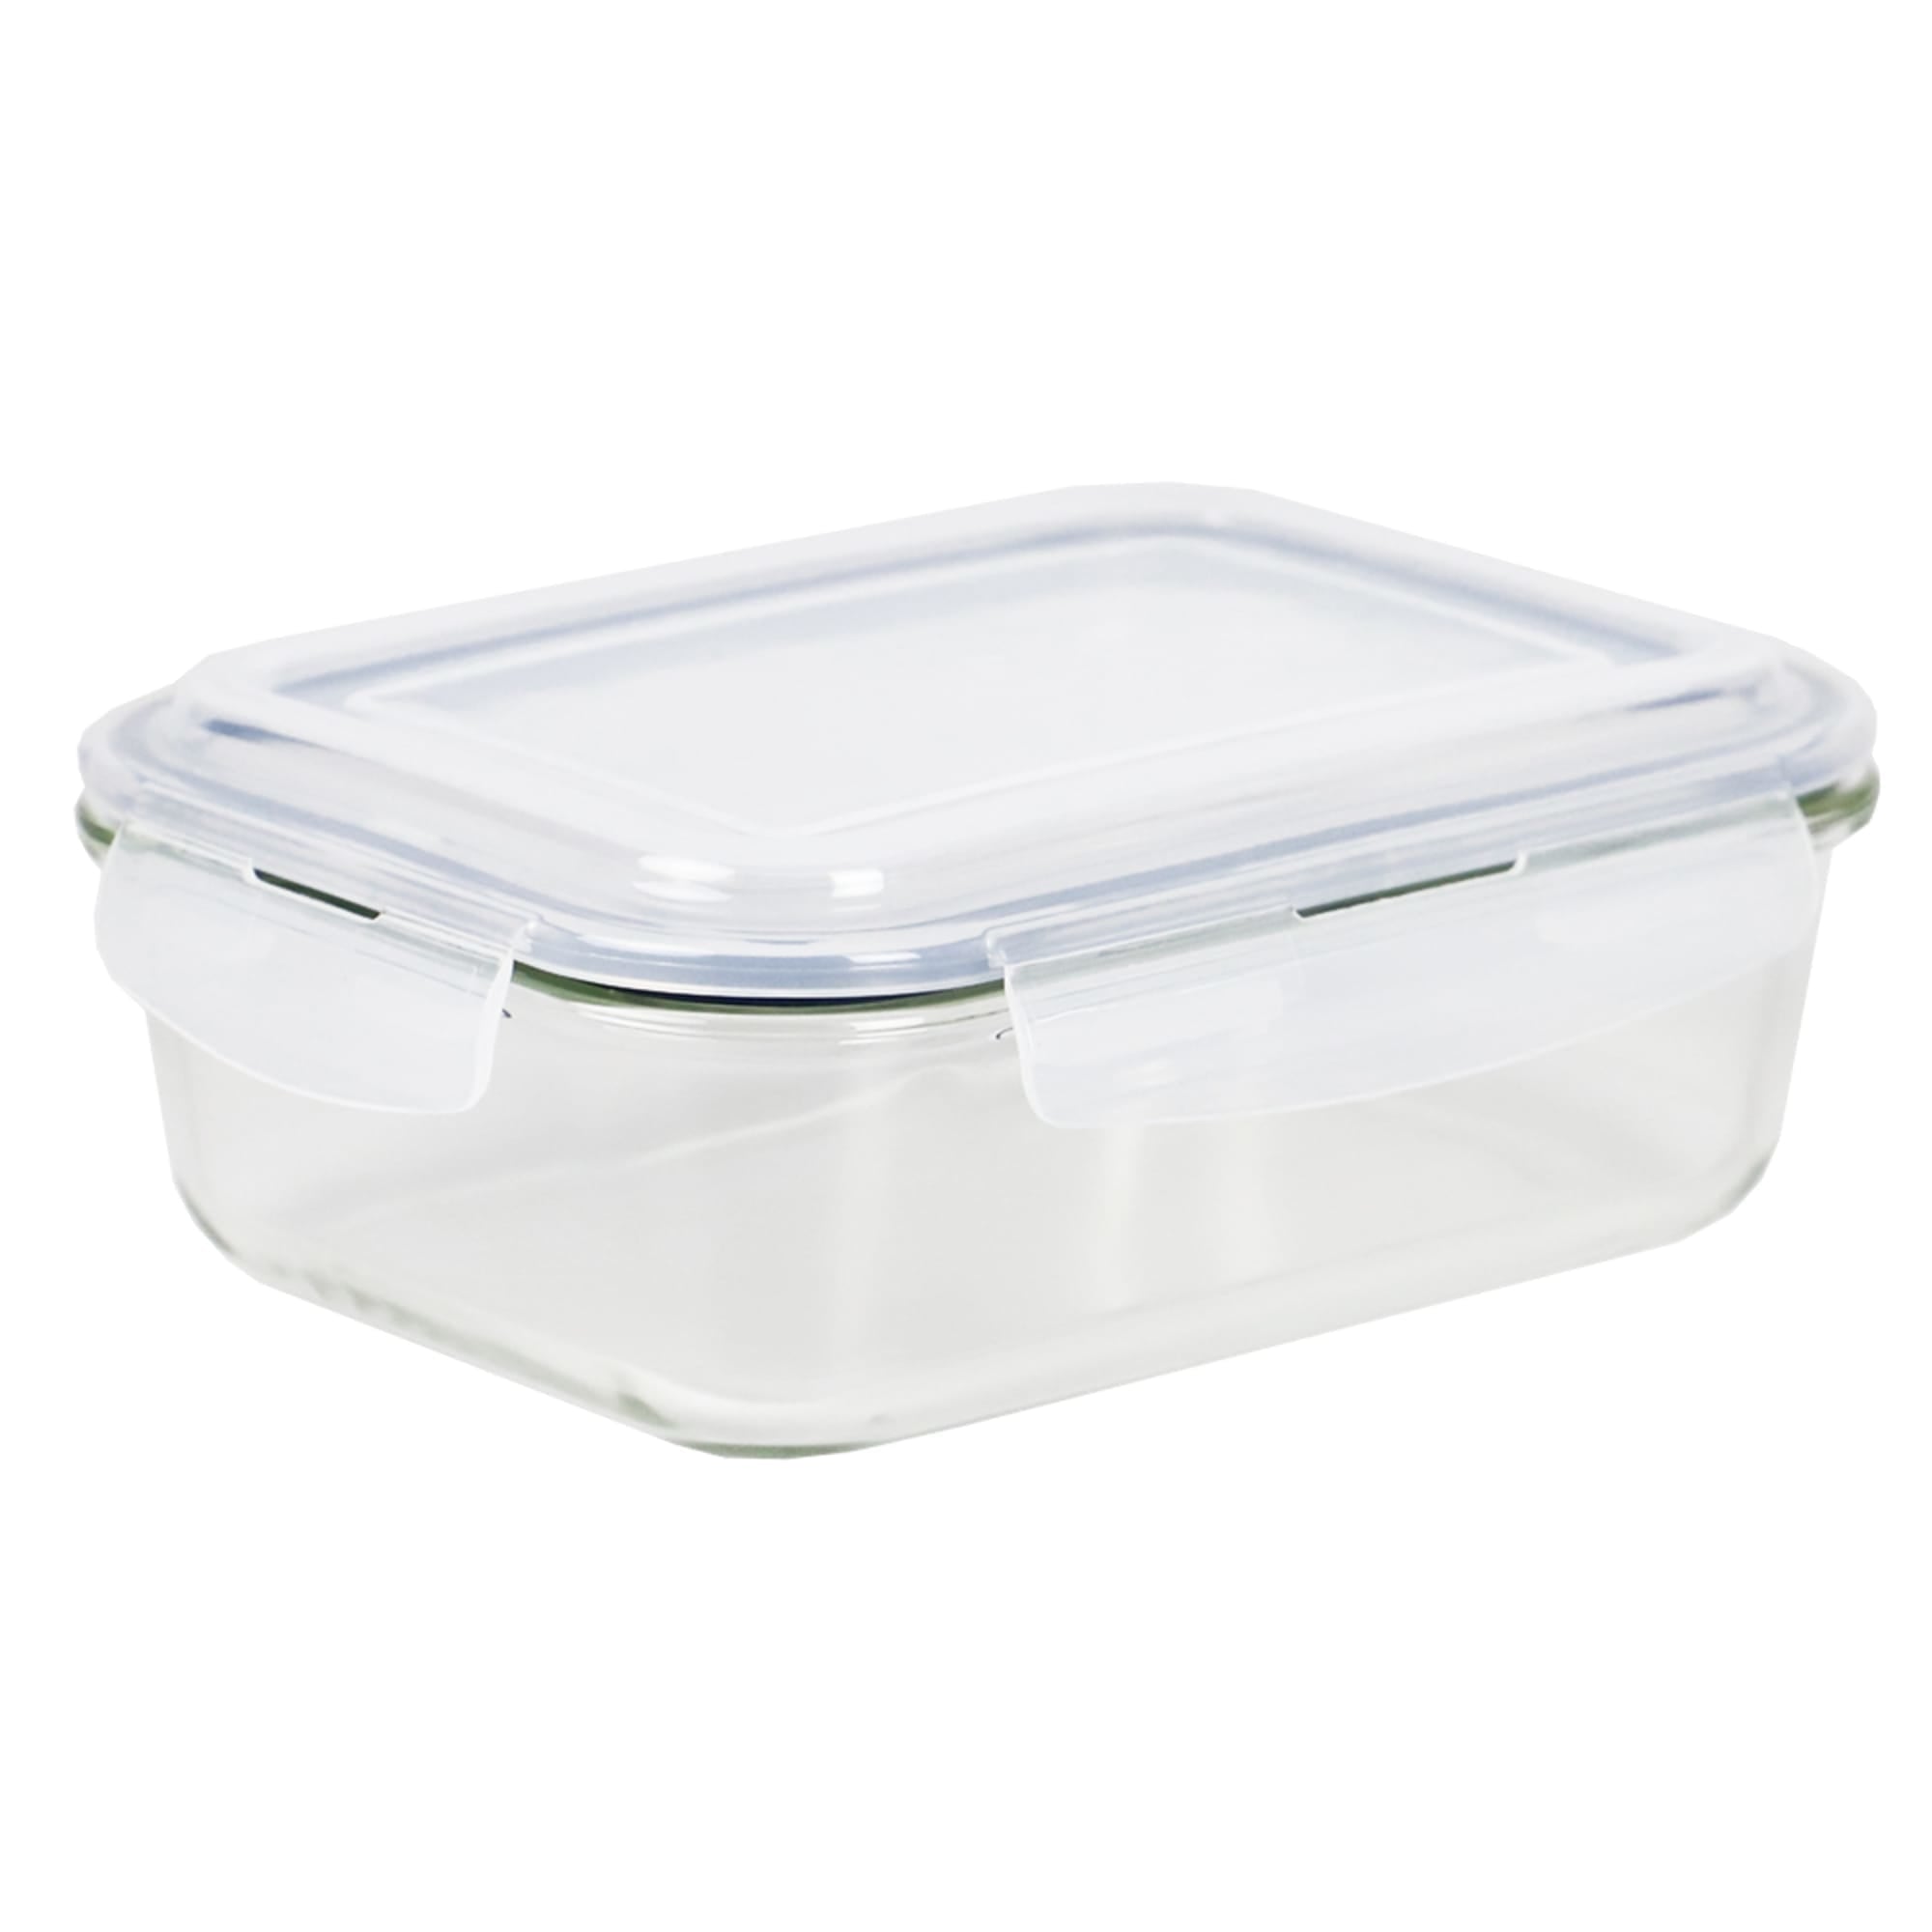 Michael Graves Design 51 Ounce High Borosilicate Glass Rectangle Food Storage Container with Indigo Rubber Seal $8.00 EACH, CASE PACK OF 12